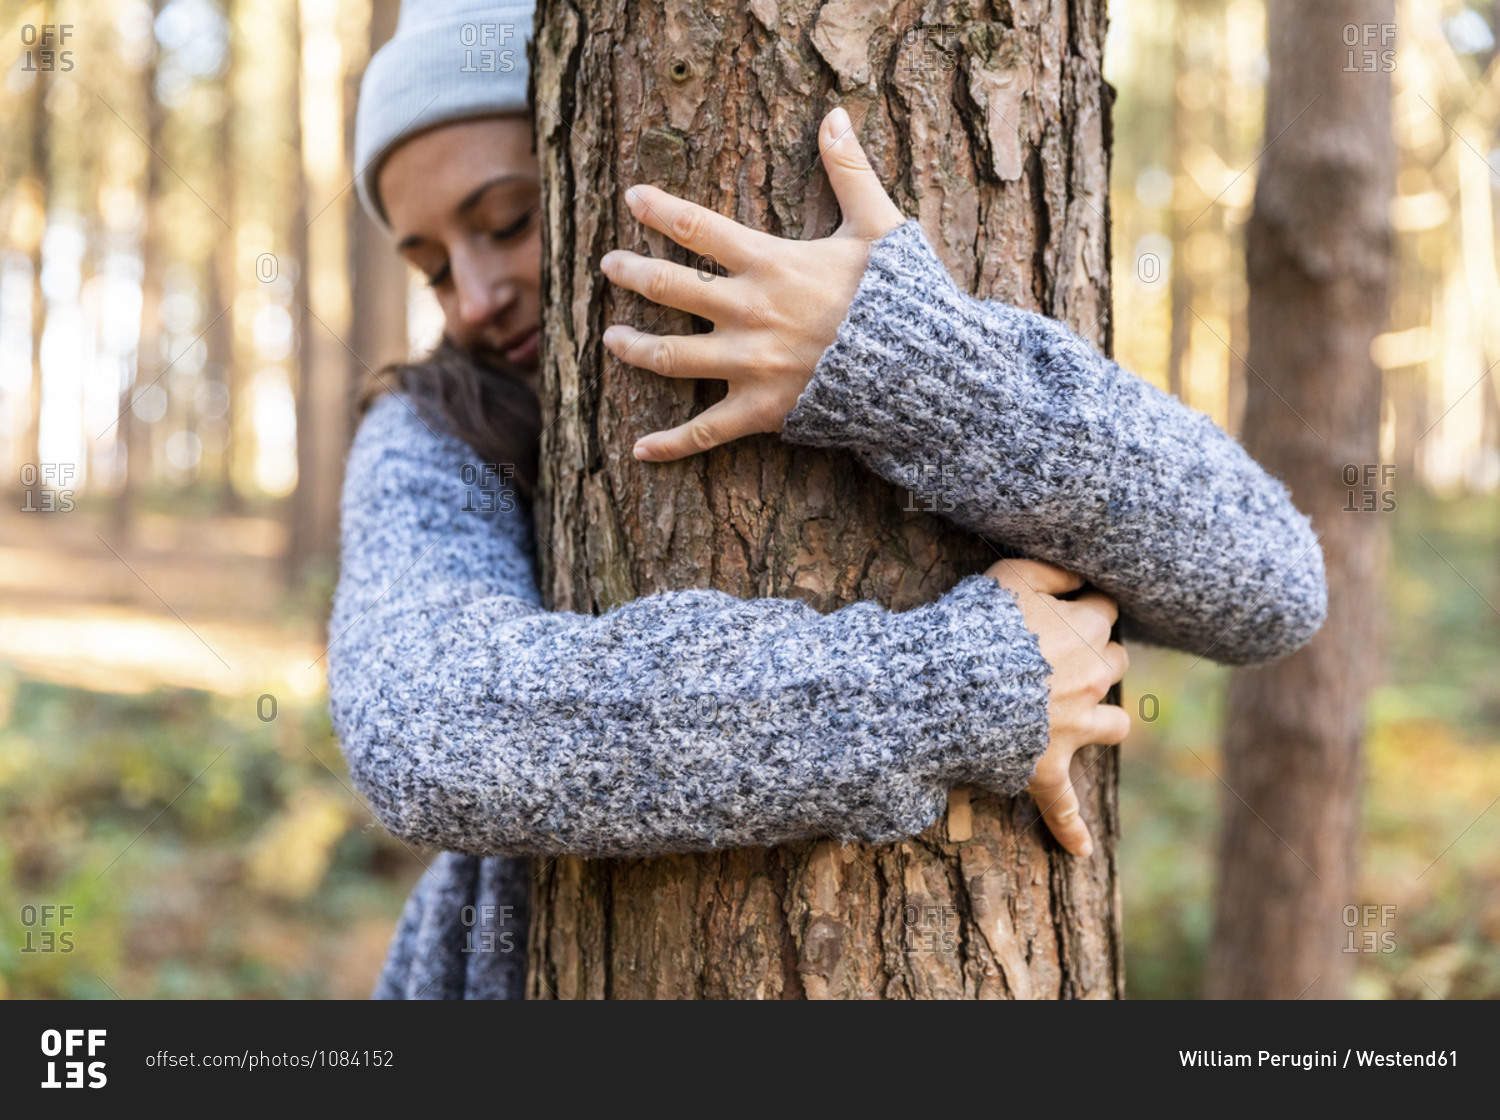 Female explorer embracing tree trunk while hiking in Cannock Chase woodland